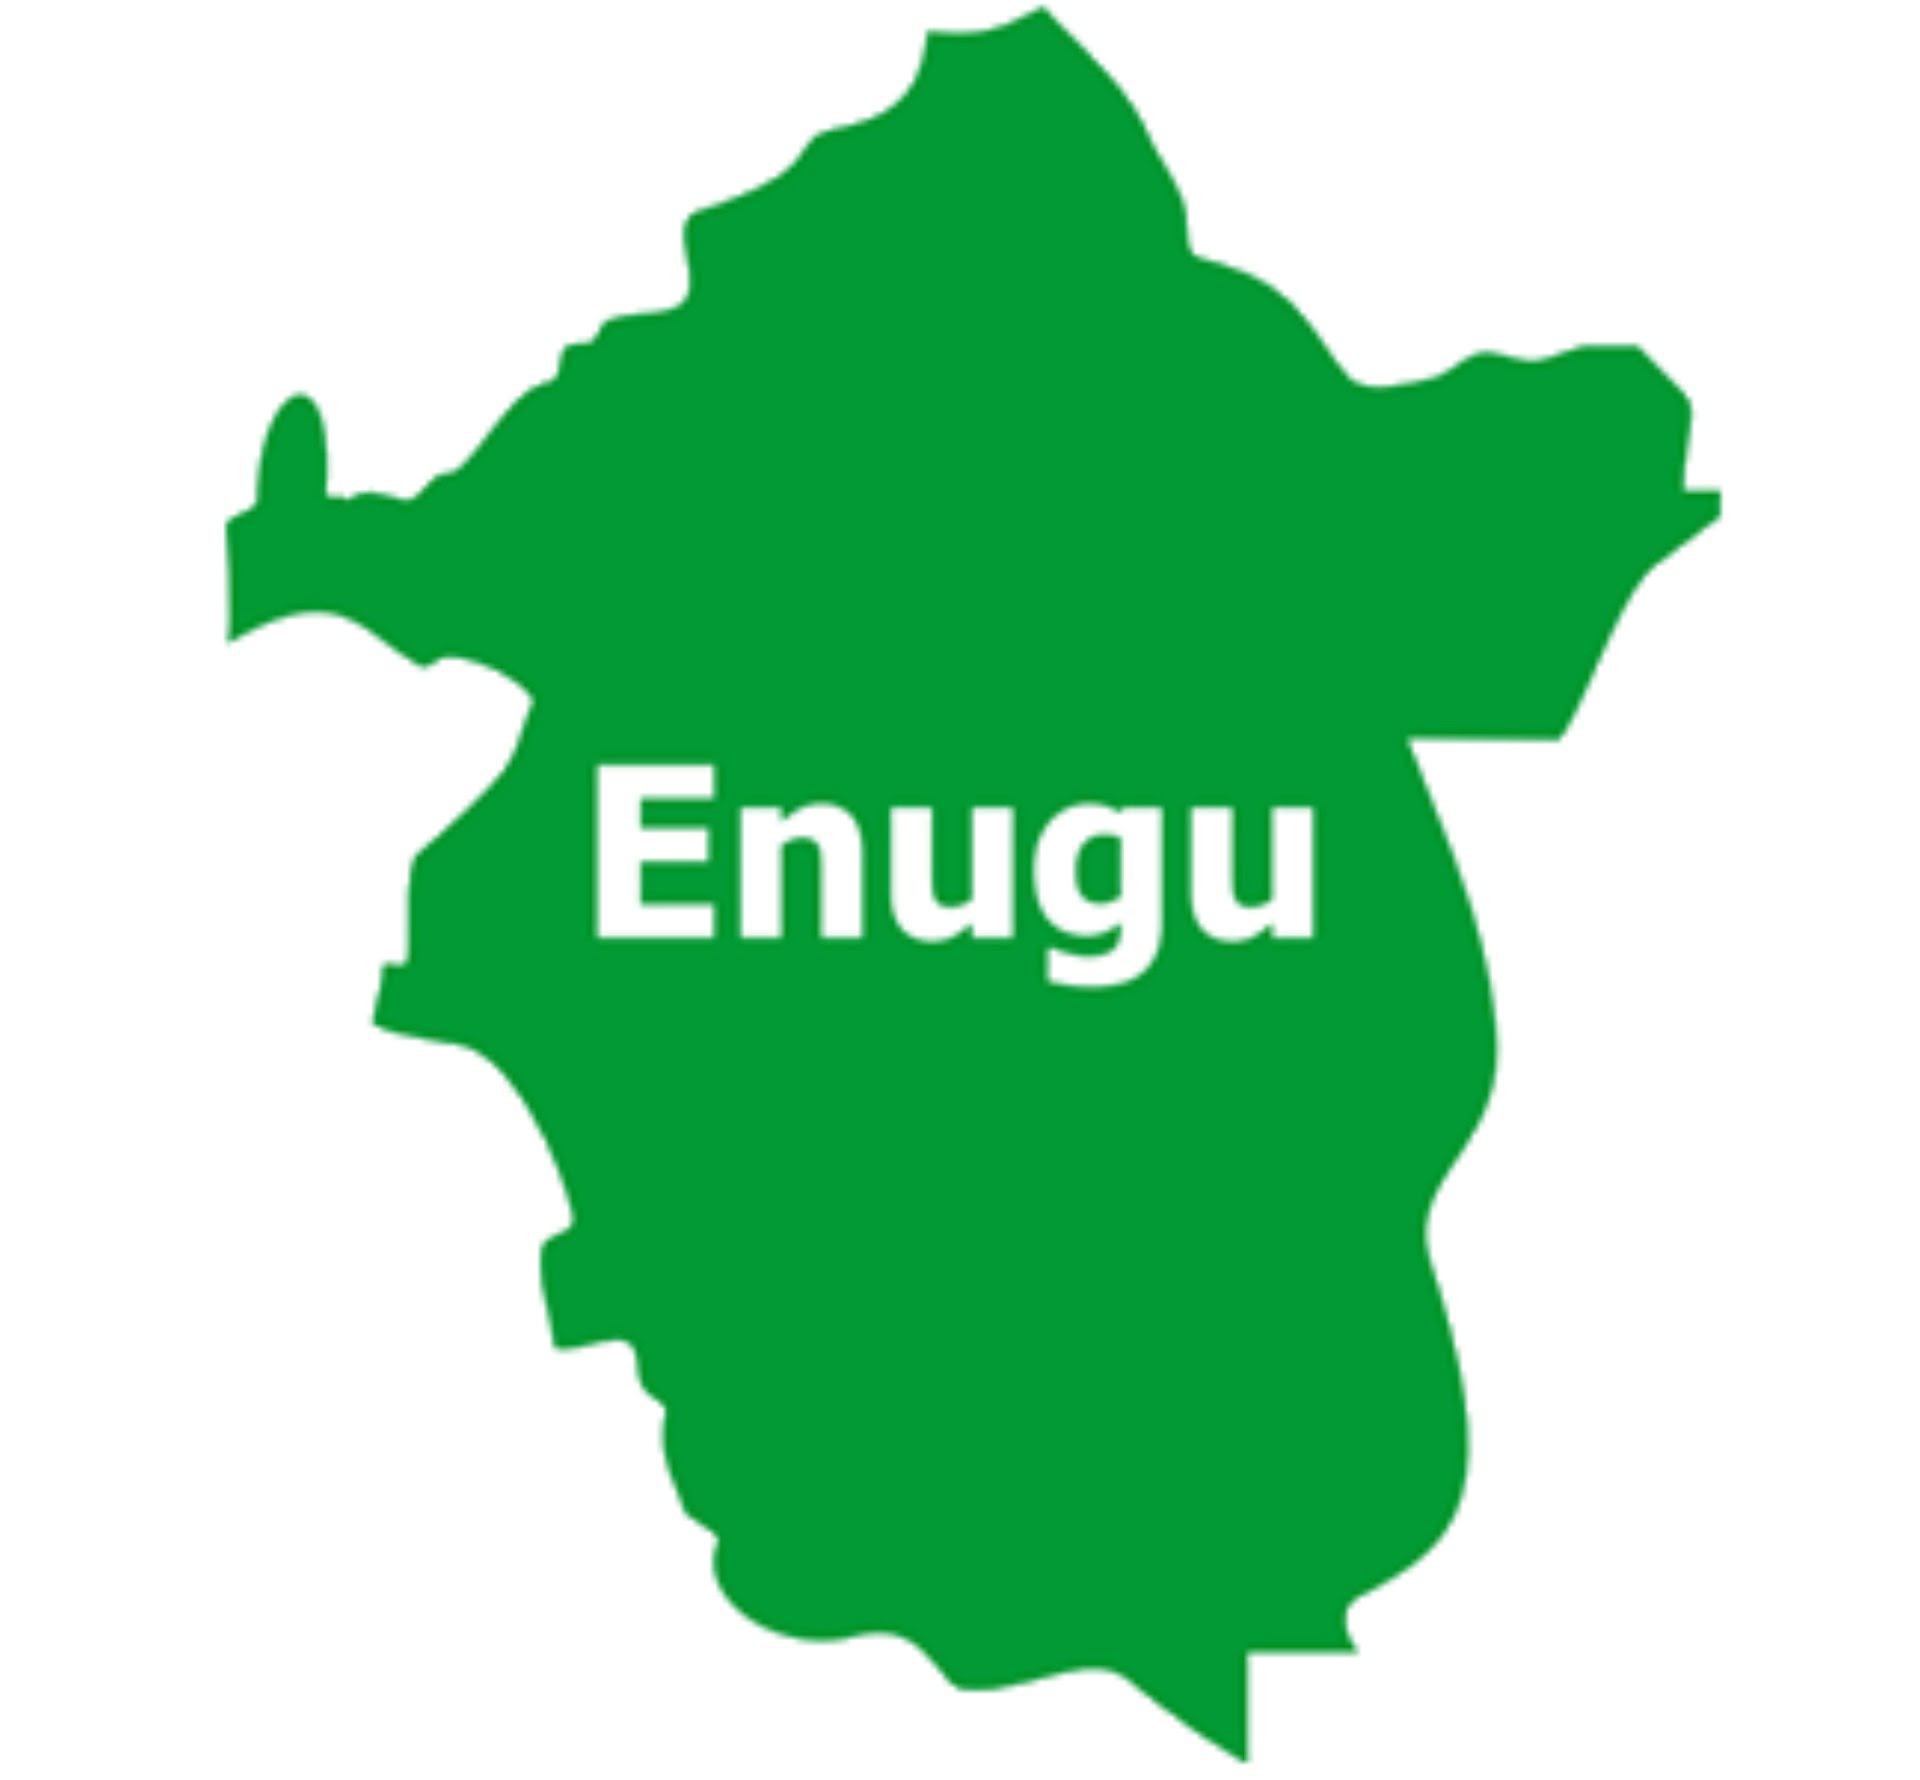 nigeria news agriculture appeals project takes midterm stock in enugu